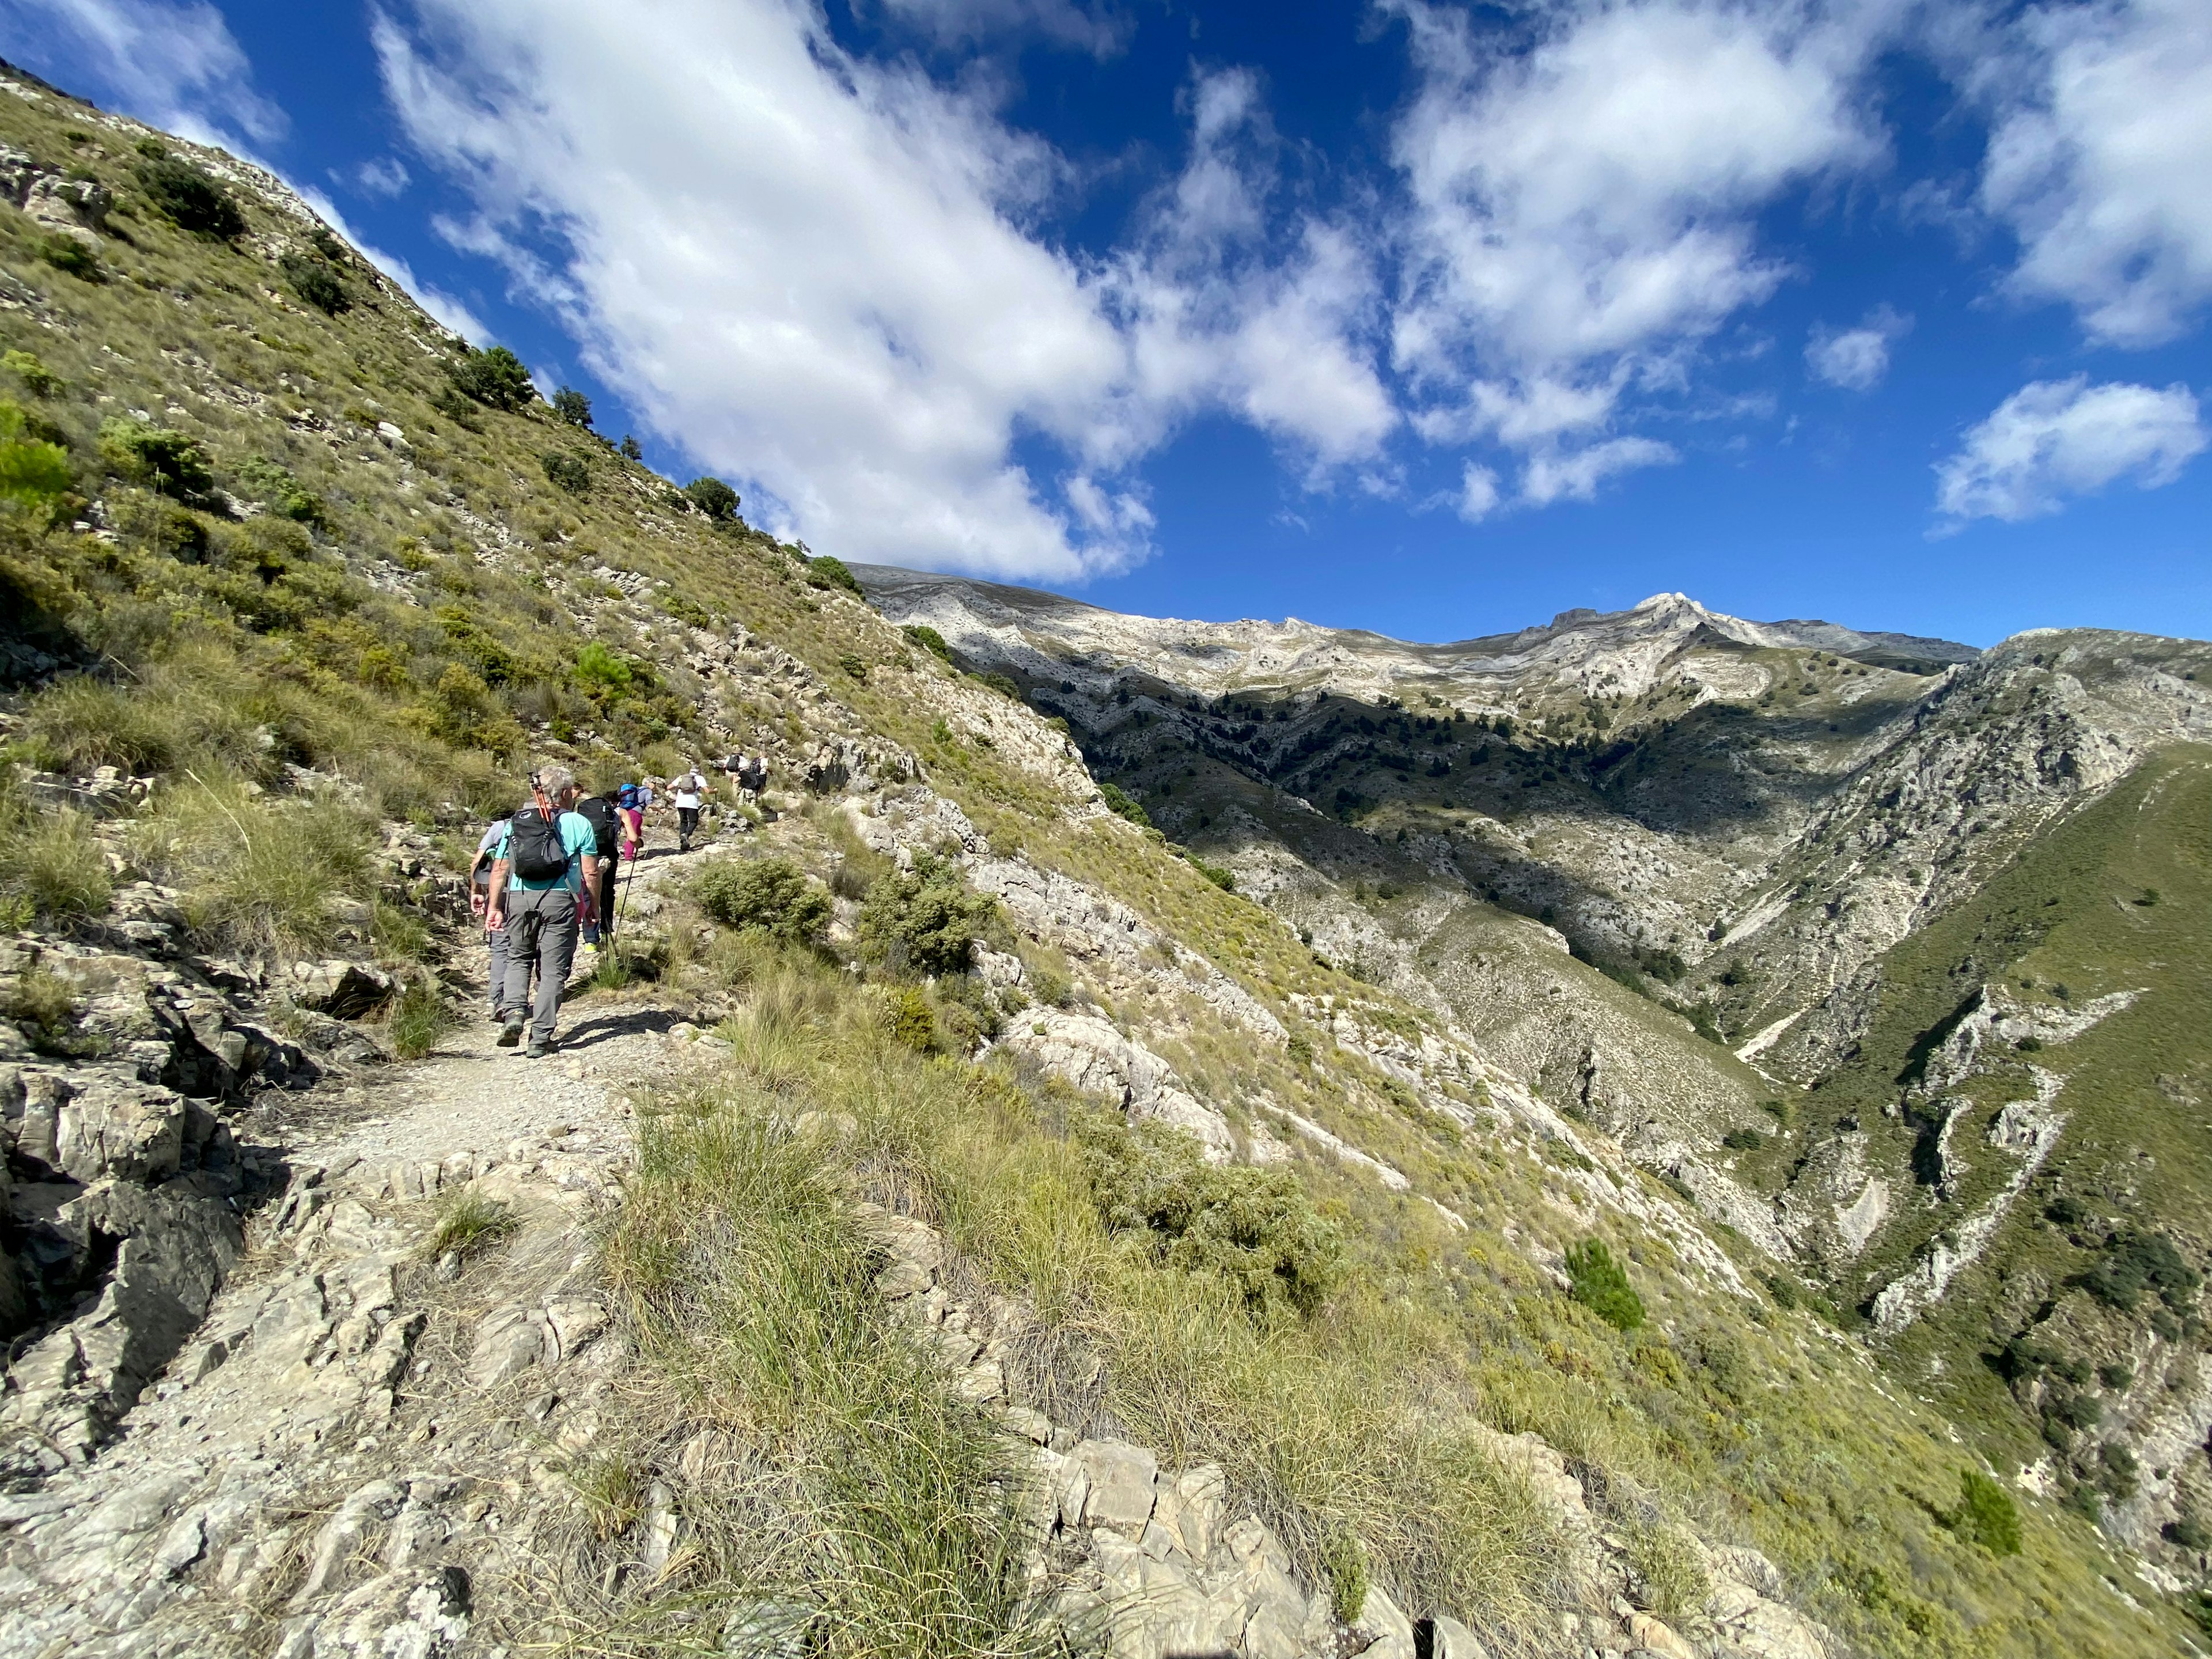 Hiking up 6,800-foot La Maroma from the village of Sedella in Andalucia.